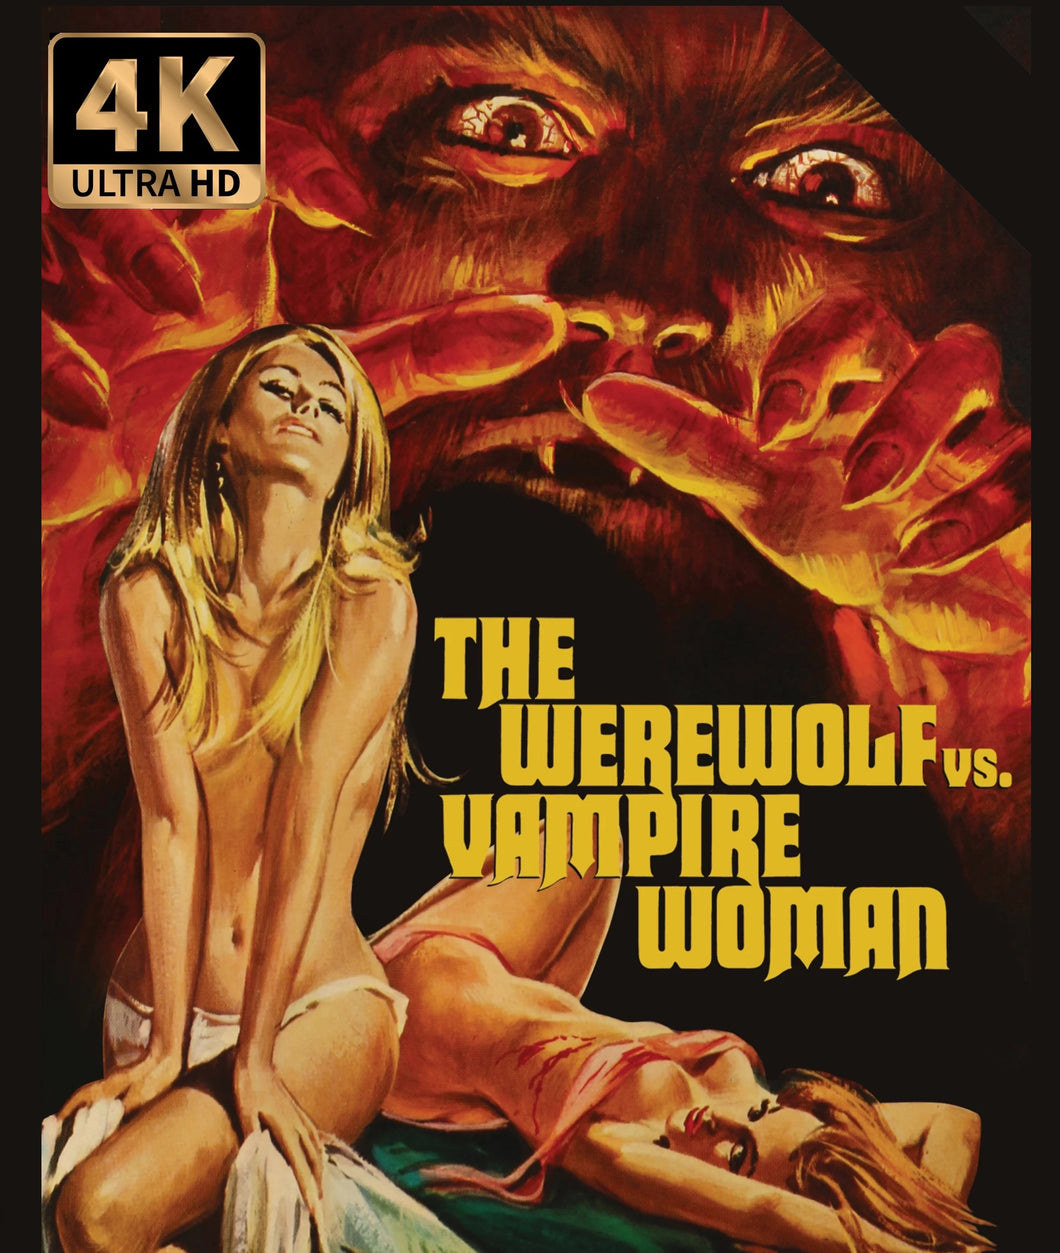 The Werewolf Versus the Vampire Woman 4K Blu-ray - front cover